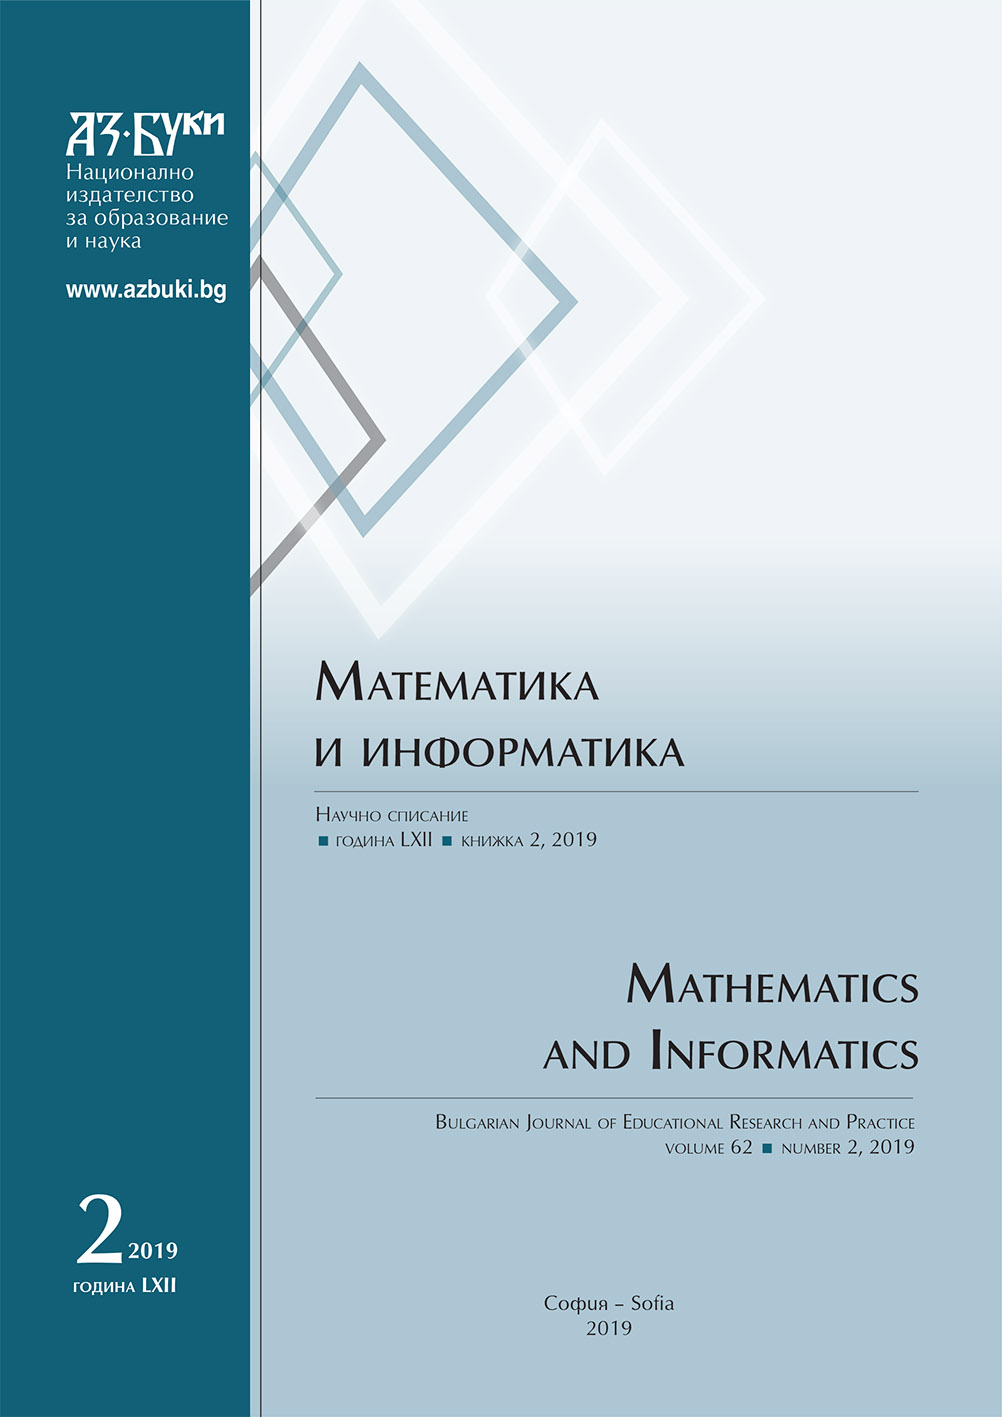 One Generalization of the Geometric Problem from 19th Junior Balkan Mathematical Olympiad Cover Image